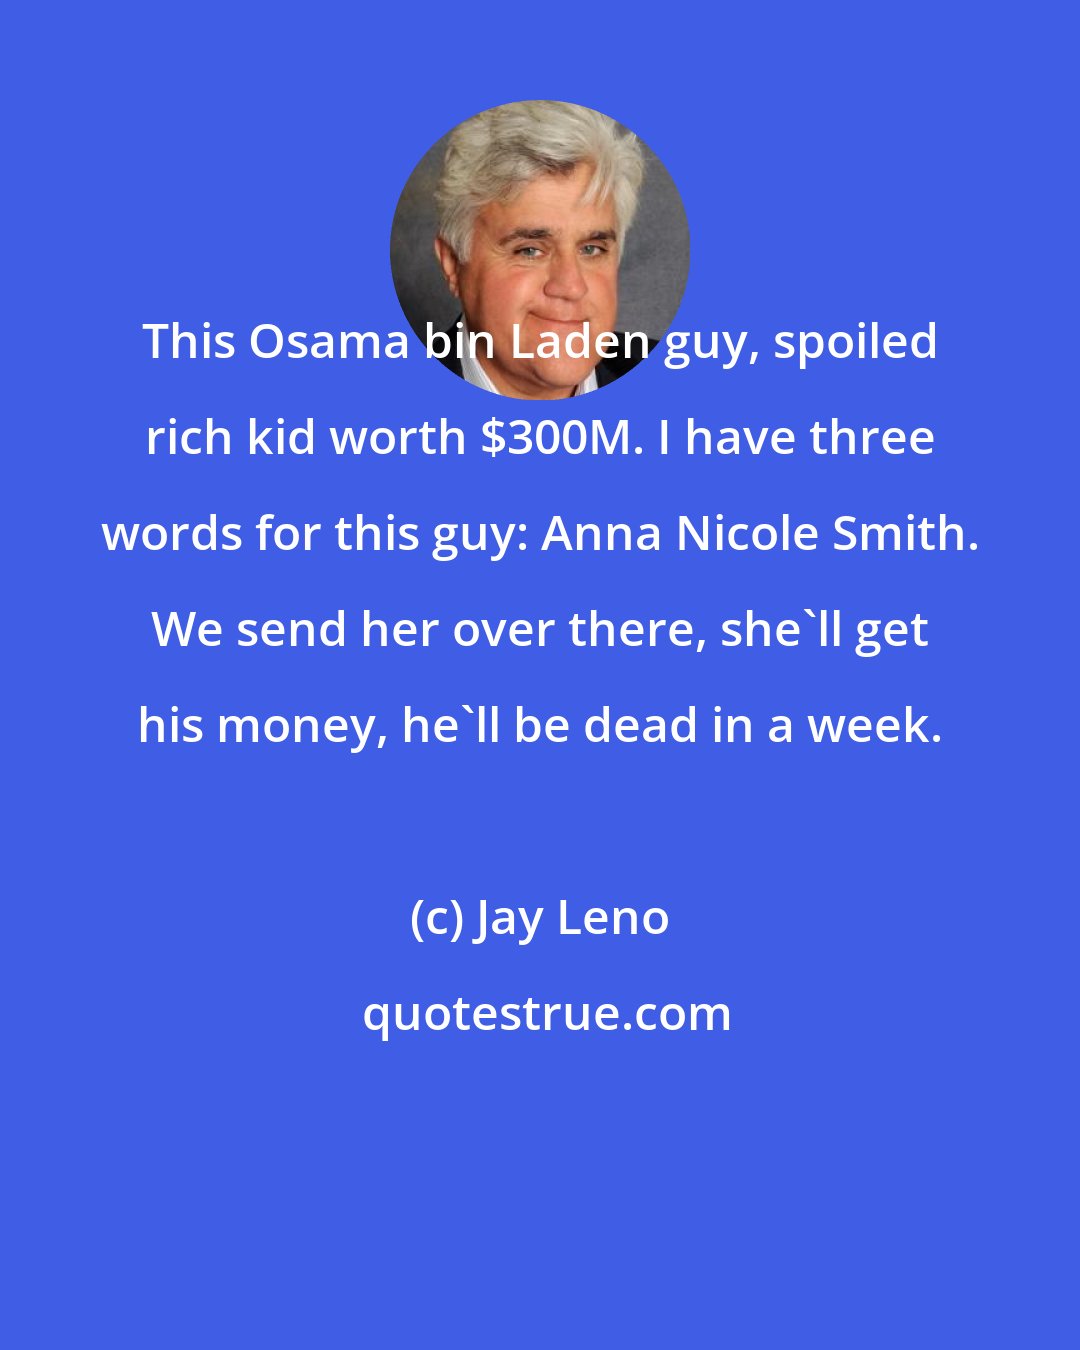 Jay Leno: This Osama bin Laden guy, spoiled rich kid worth $300M. I have three words for this guy: Anna Nicole Smith. We send her over there, she'll get his money, he'll be dead in a week.